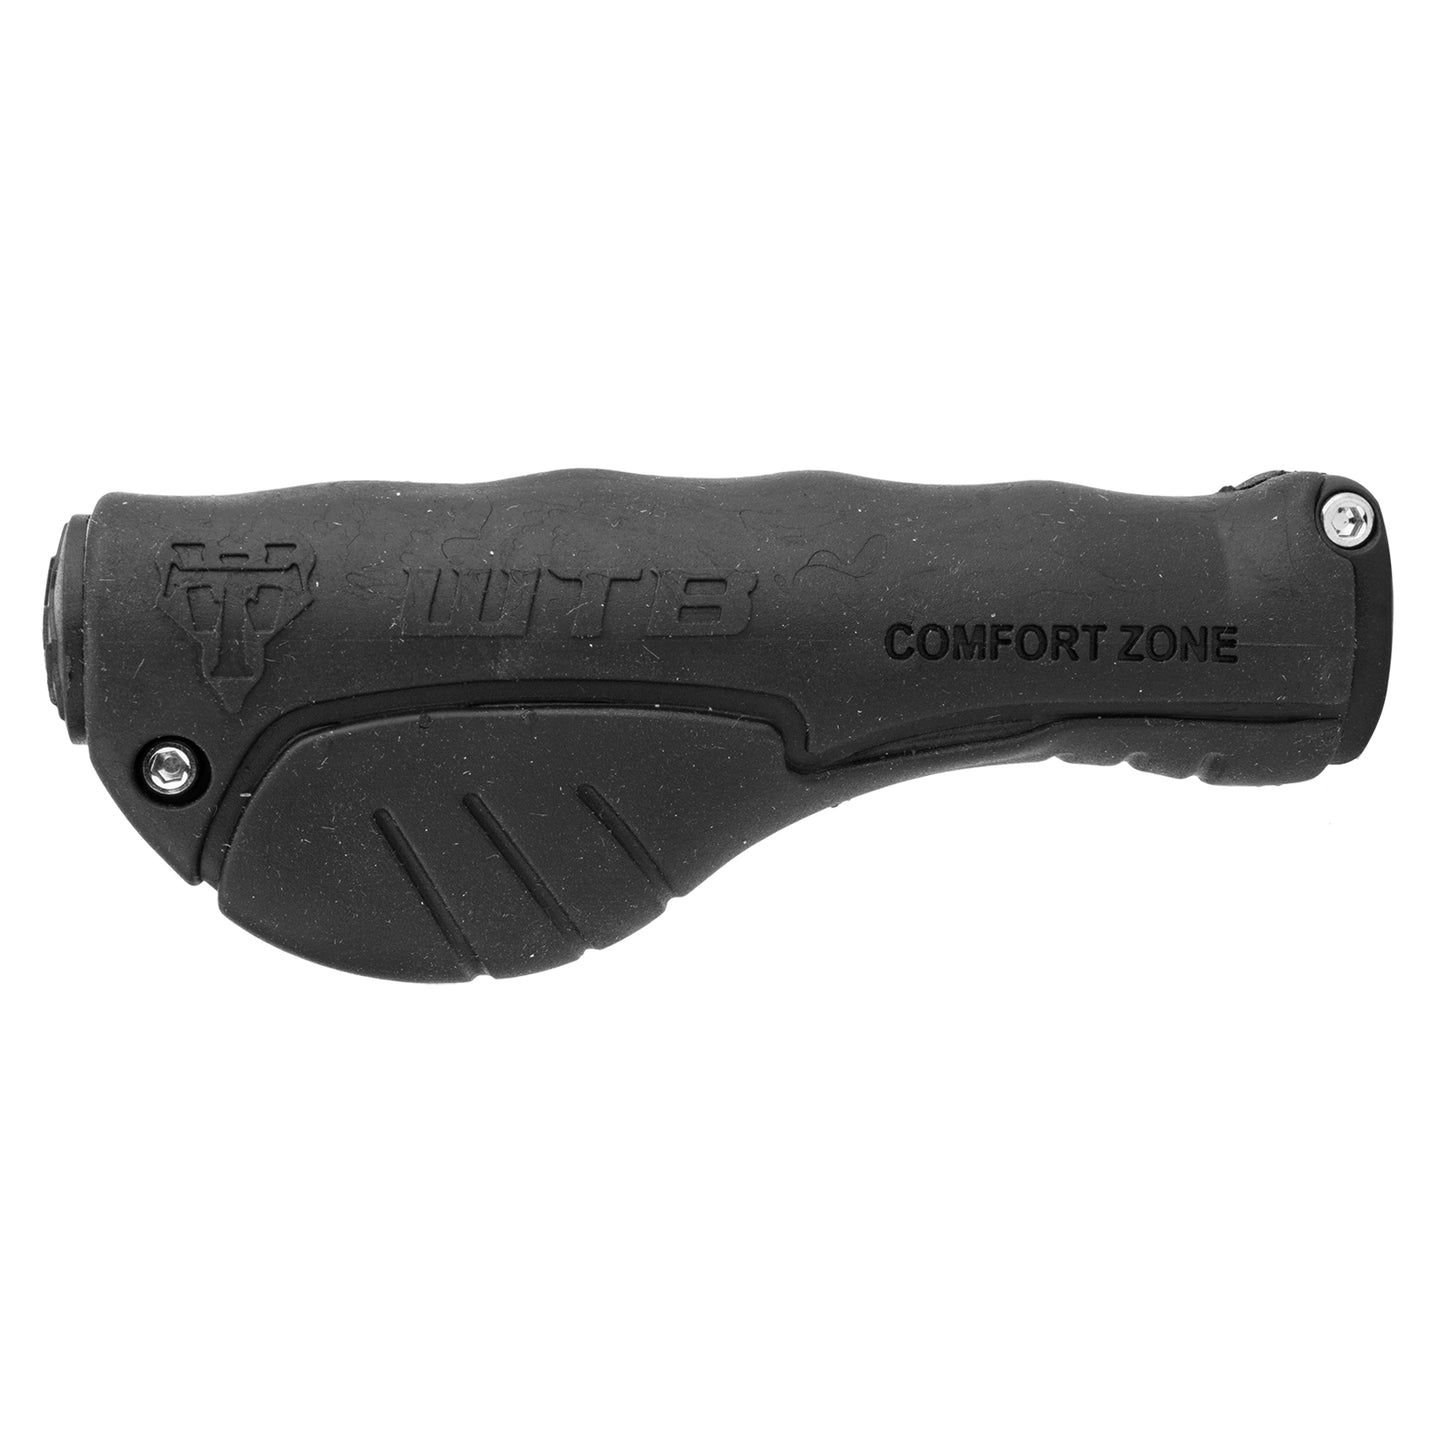 GRIPS WTB COMFORT ZONE CLAMP-ON BLK